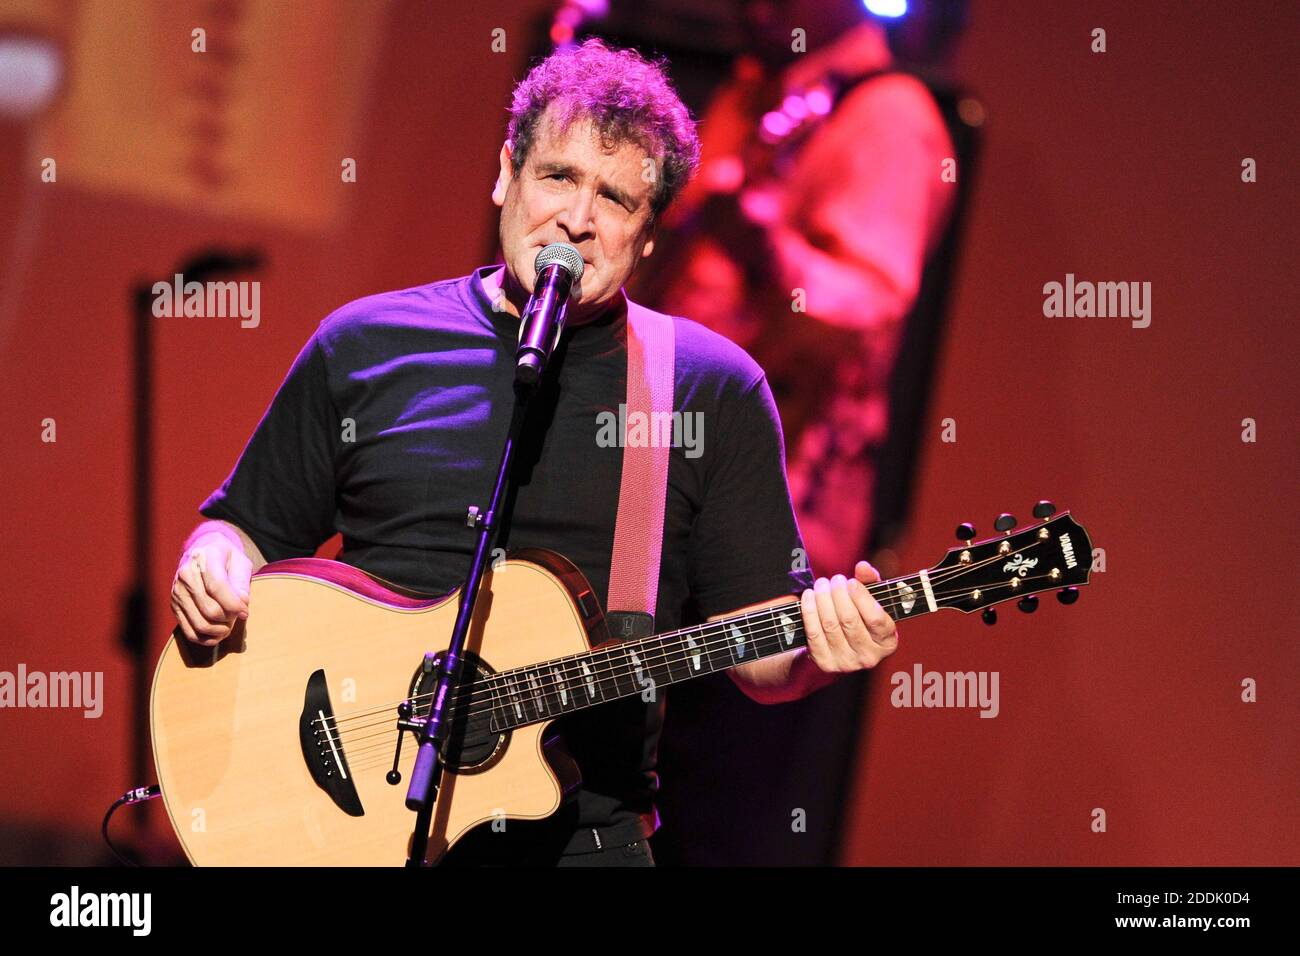 File photo - South African singer Johnny Clegg performs during 'A touch of Africa ' Gala Night in Monte Carlo, Monaco on September 29, 2012 to open the winter season of SBM with a gala night in honour of South Africa and a Johnny Clegg's live concert at the Salle Garnier. Clegg, has died at the age of 66, after a long battle with pancreatic cancer. Known as the 'white Zulu', he was a vocal critic of the apartheid government which ruled until 1994.The British-born musician, who uniquely blended western and Zulu music, was diagnosed with cancer in 2015. Photo by David Nivirere/Pool/ABACAPRESS.CO Stock Photo